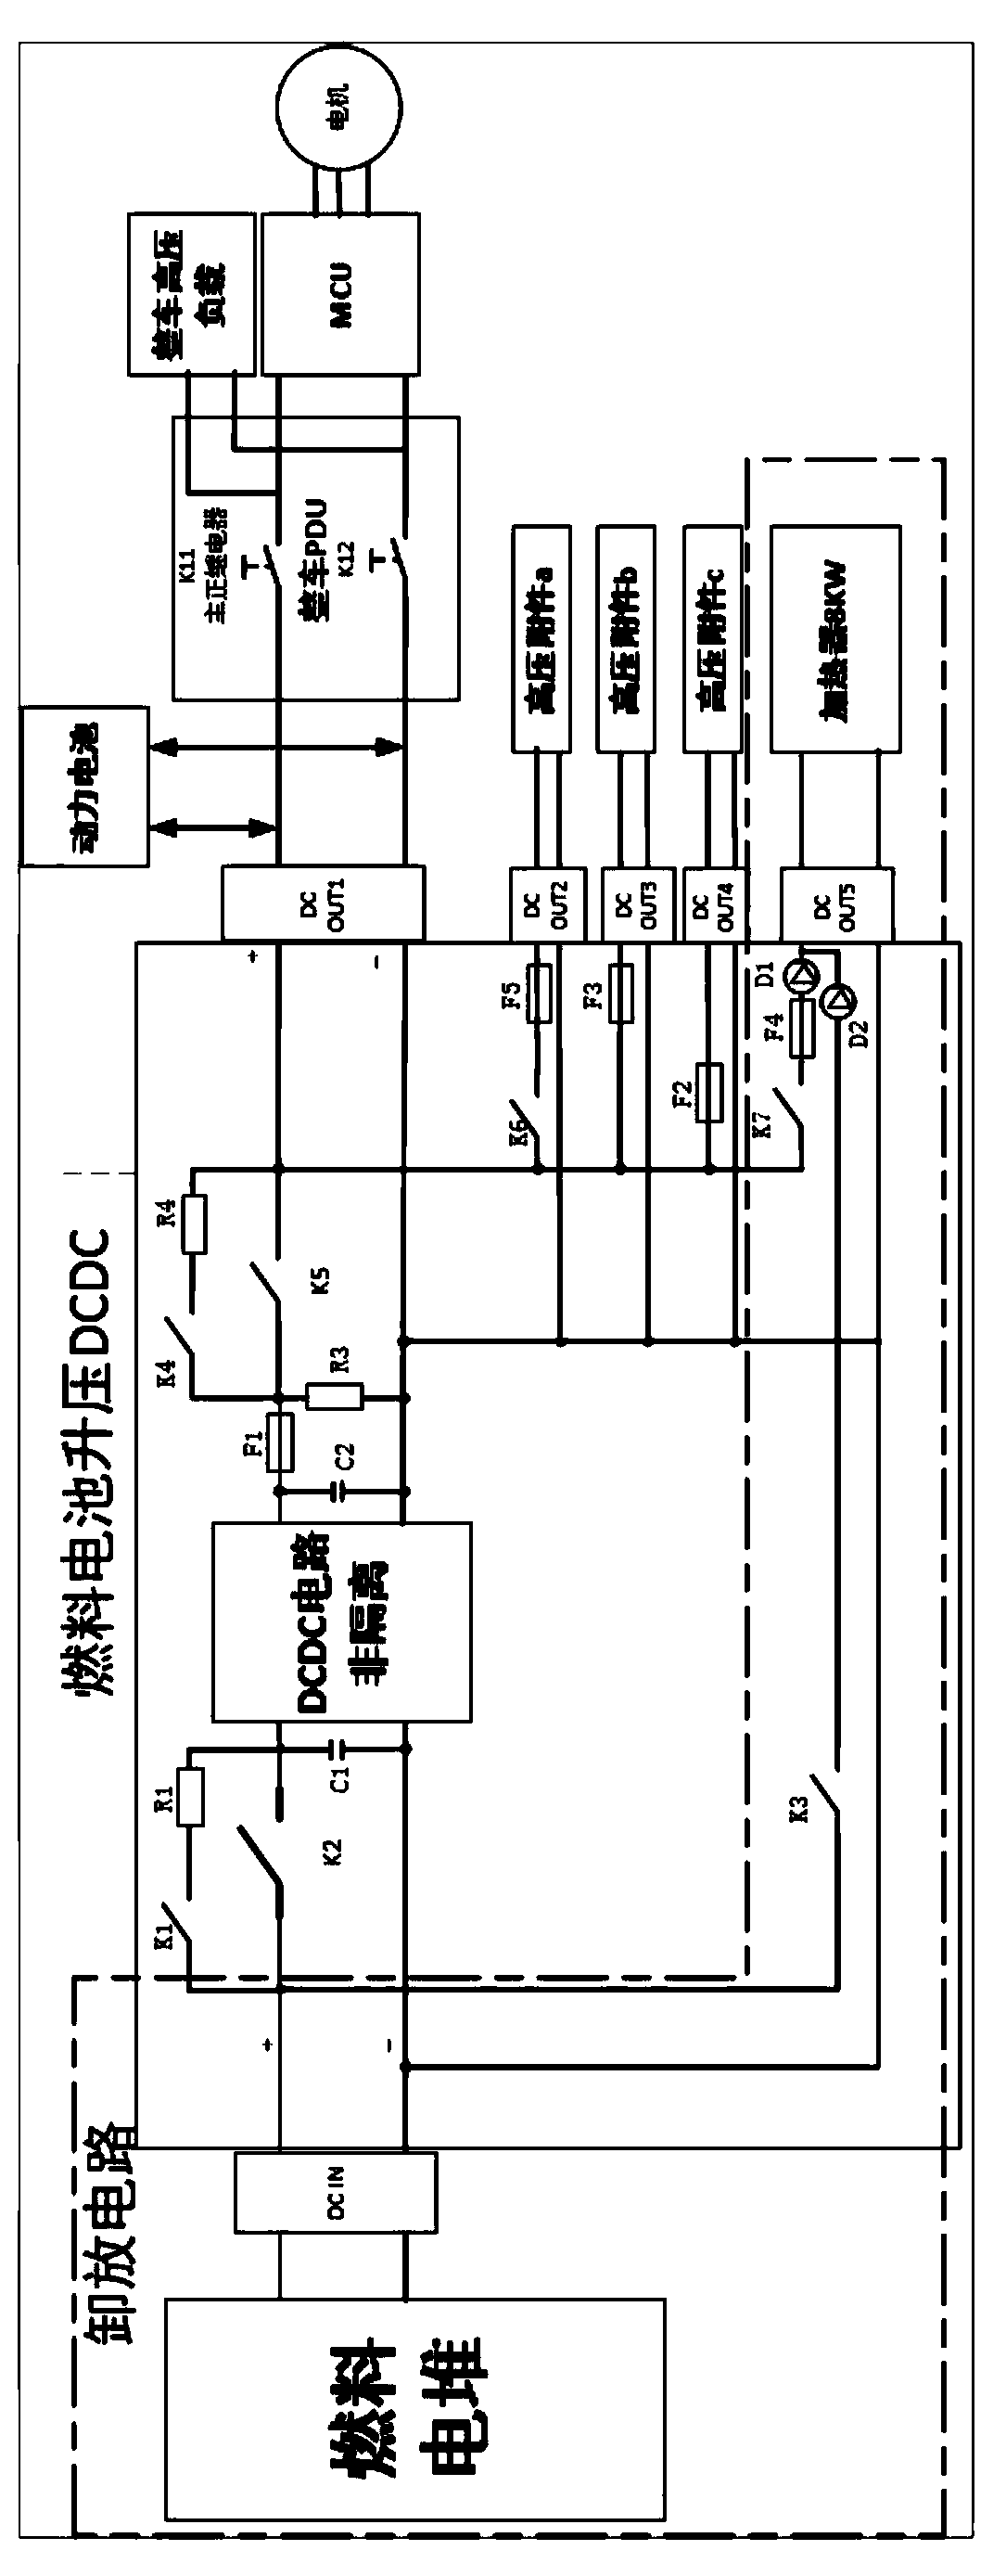 Fuel cell system bleeder circuit based on two-stage protection